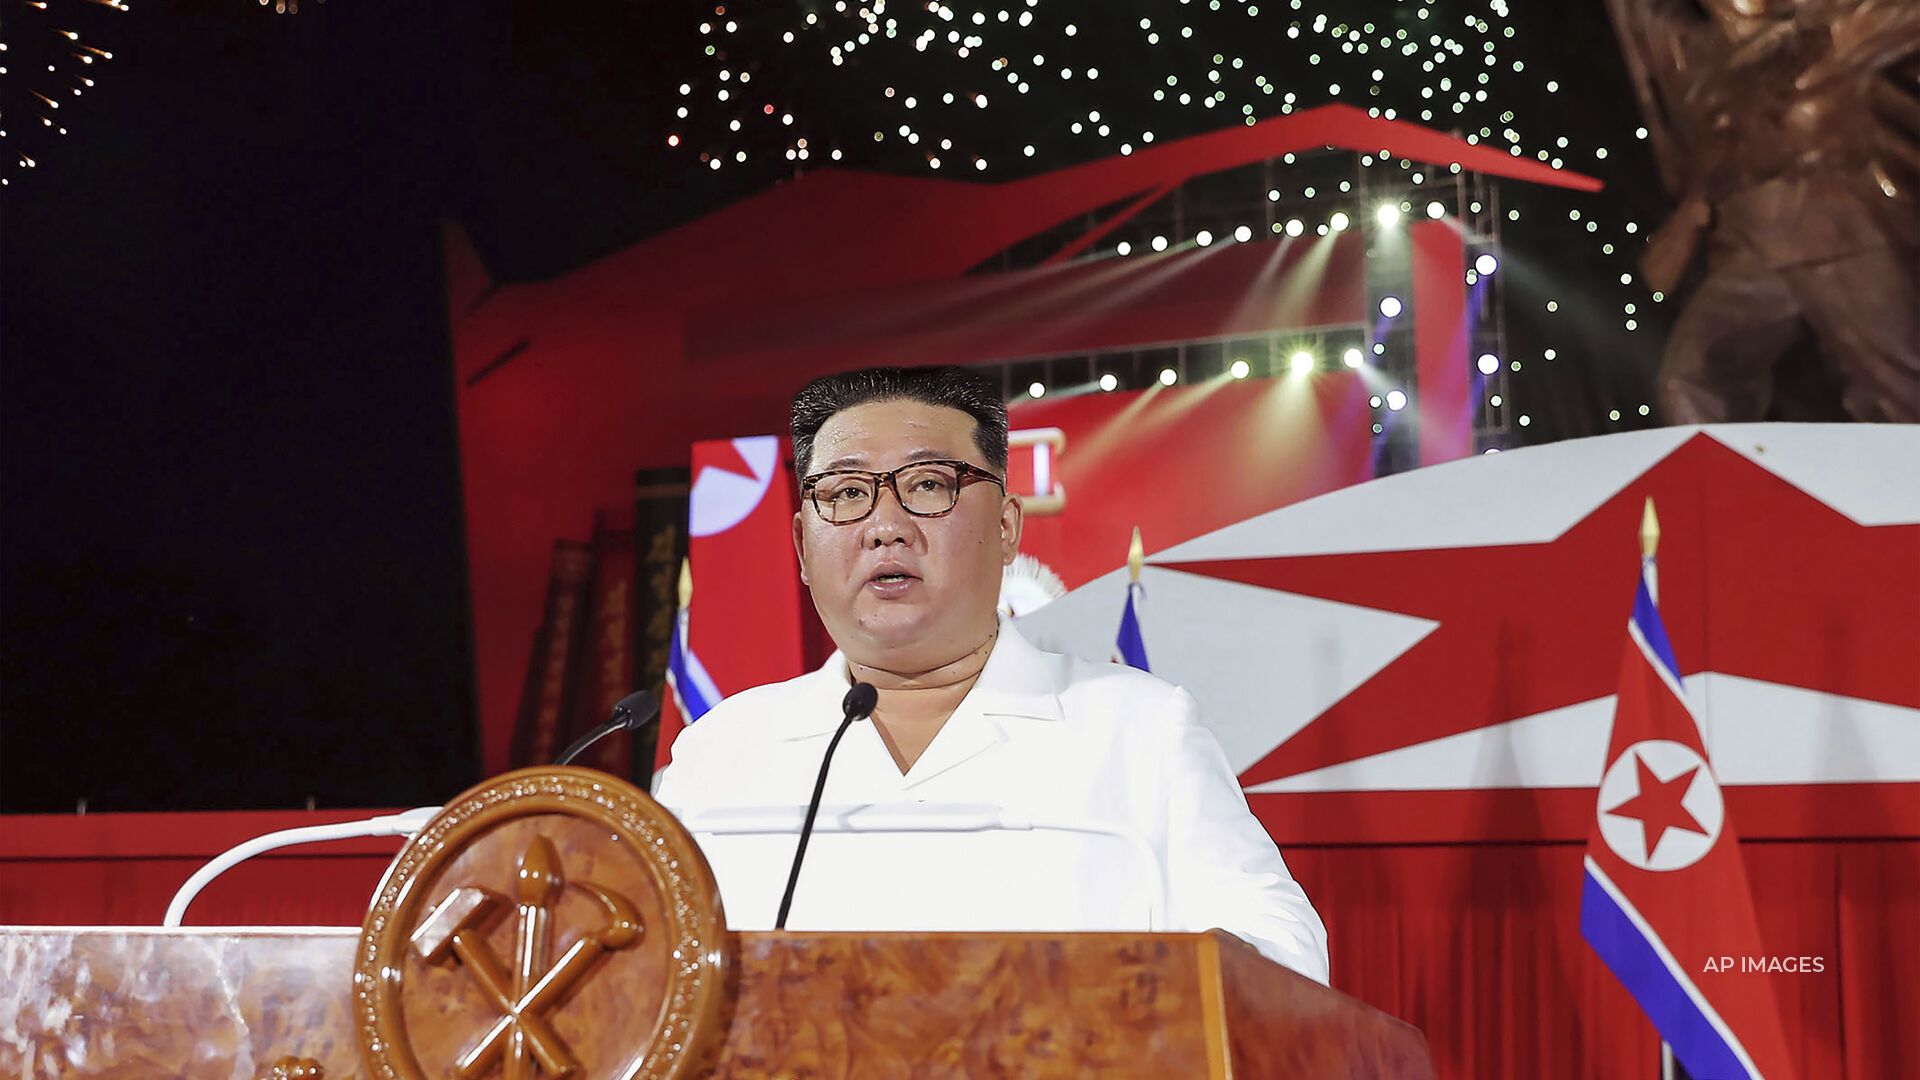 North Korea's Kim Jong Un says it is prepared for nuclear fight with United States and allies, the Navy departs for South China sea, the Forward Party emerges.